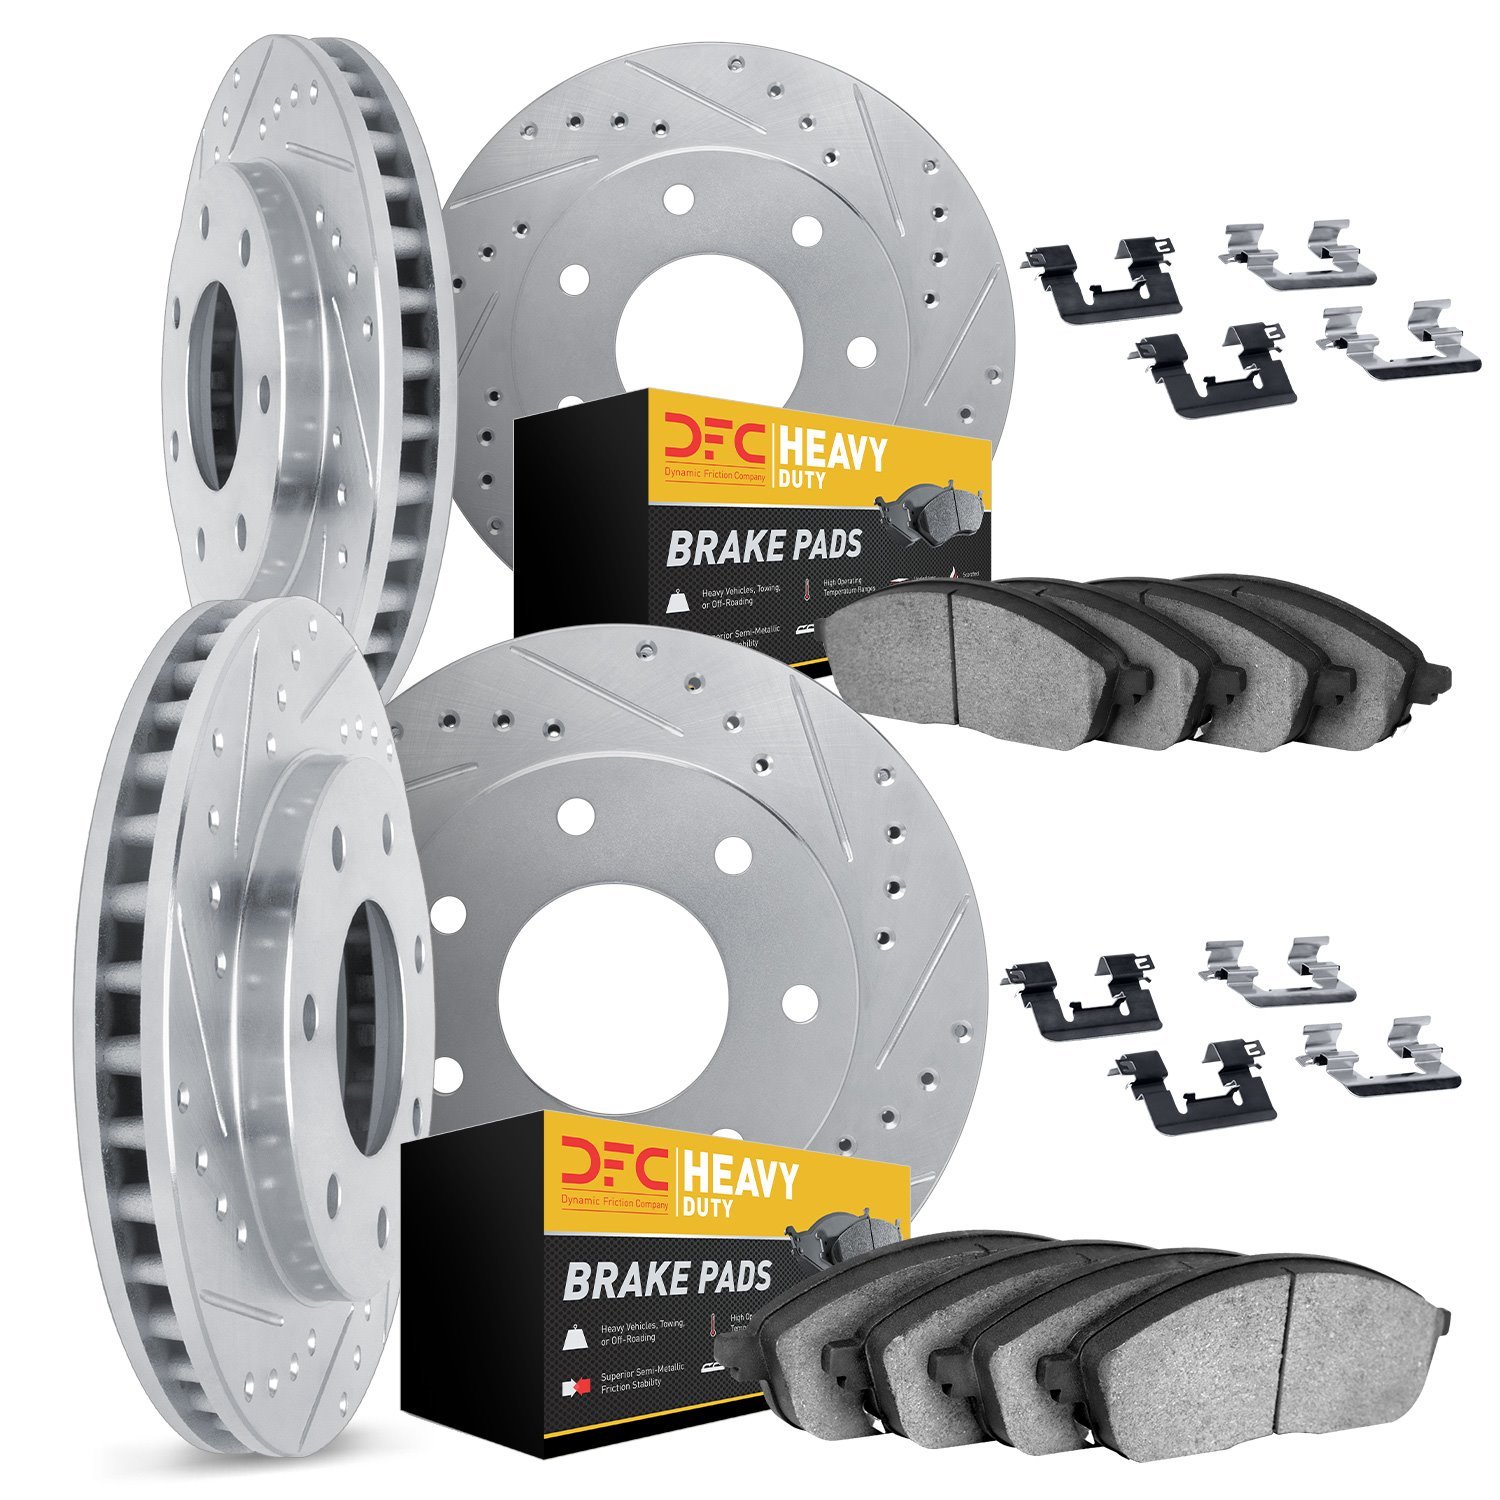 7214-54004 Drilled/Slotted Rotors w/Heavy-Duty Brake Pads Kit & Hardware [Silver], 2012-2014 Ford/Lincoln/Mercury/Mazda, Positio